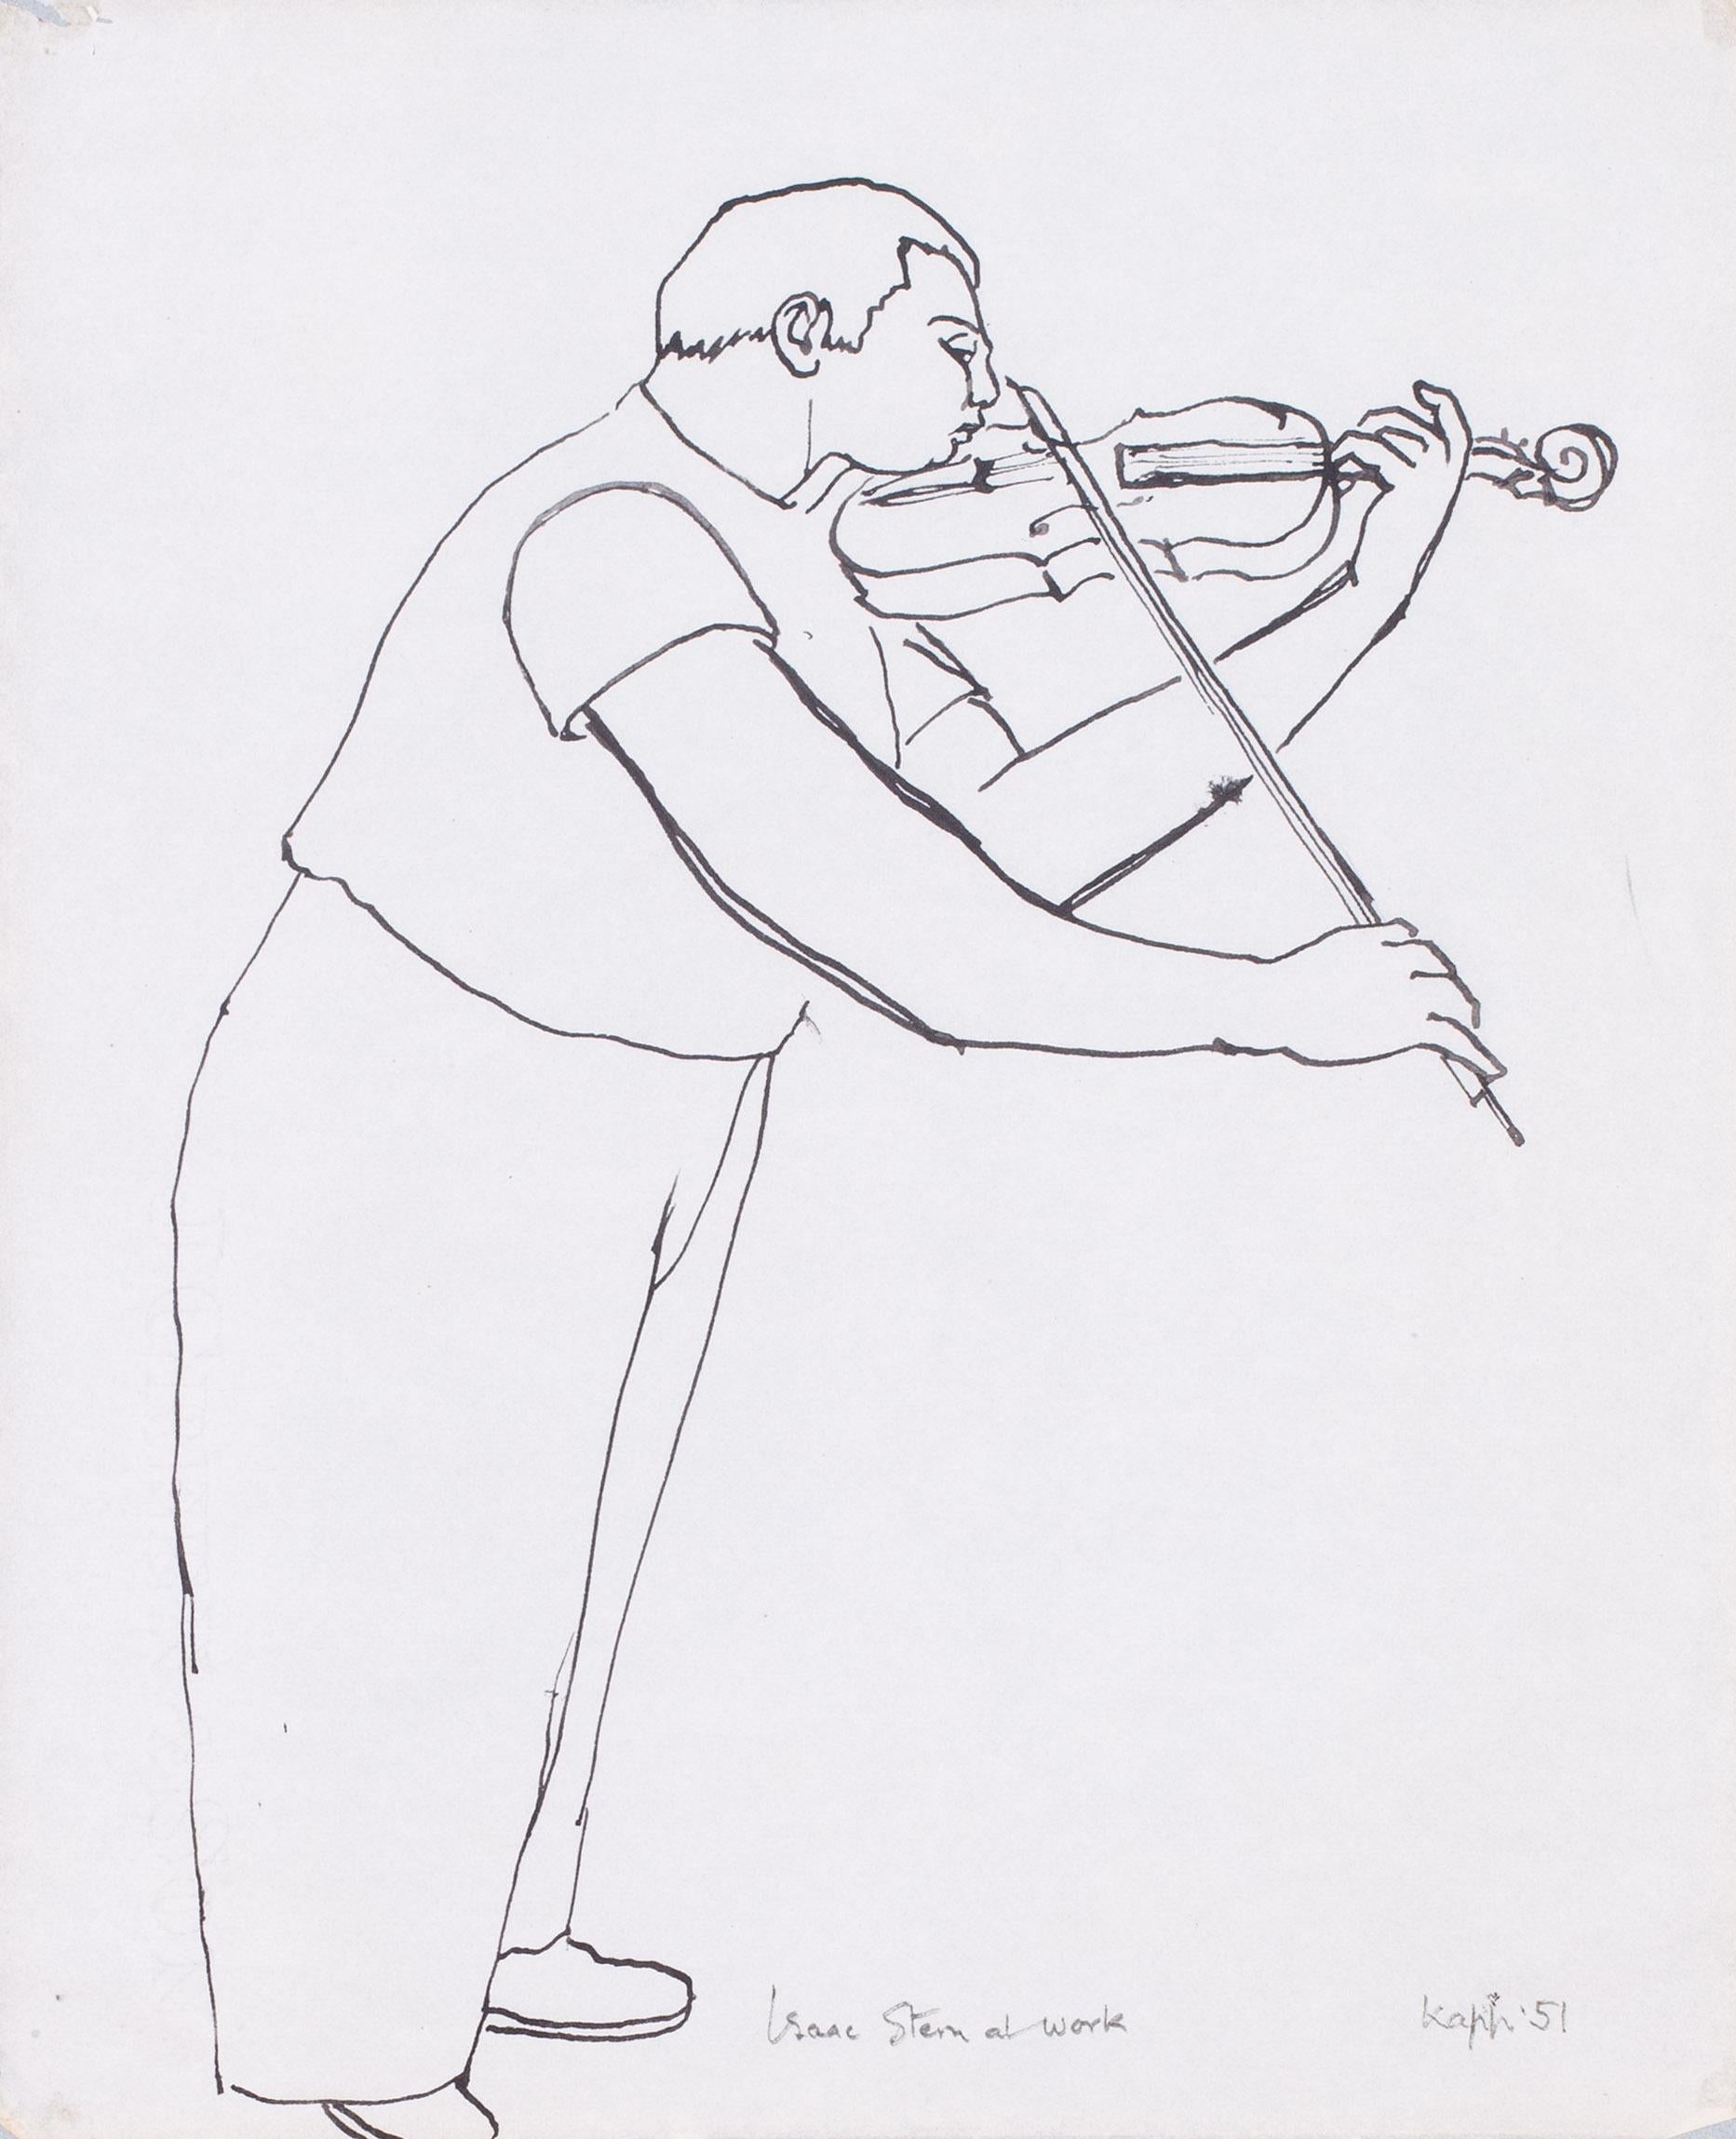 Edmond Xavier Kapp (British, 1890 – 1978)
Isaac Stern at work
Inkpen
Signed, inscribed and dated ‘Isaac Stern at work Kapp 51’ (lower right)
17.1/8 x 13.7/8 in. (43.3 x 35.3 cm.) 

Edmond Kapp was born in Islington, London, on 5 November 1890, of